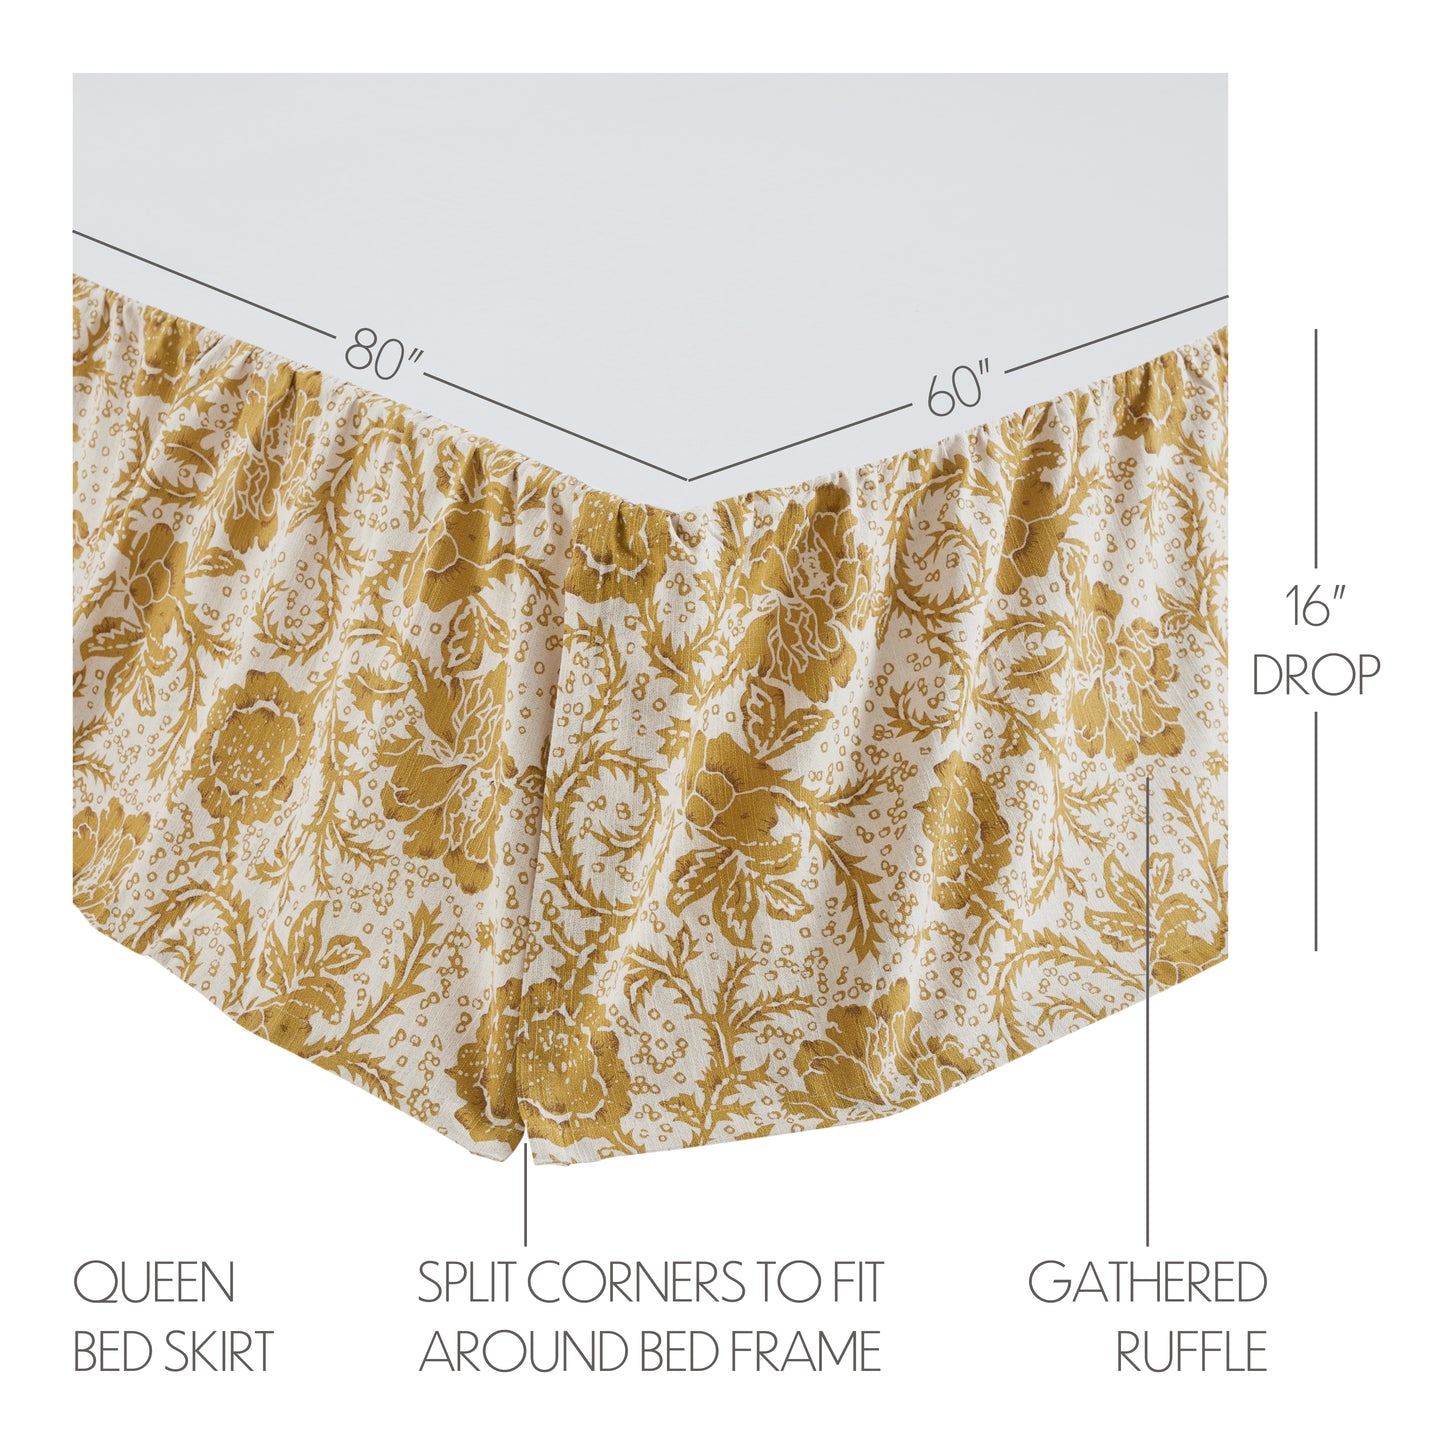 81190-Dorset-Gold-Floral-Queen-Bed-Skirt-60x80x16-image-1